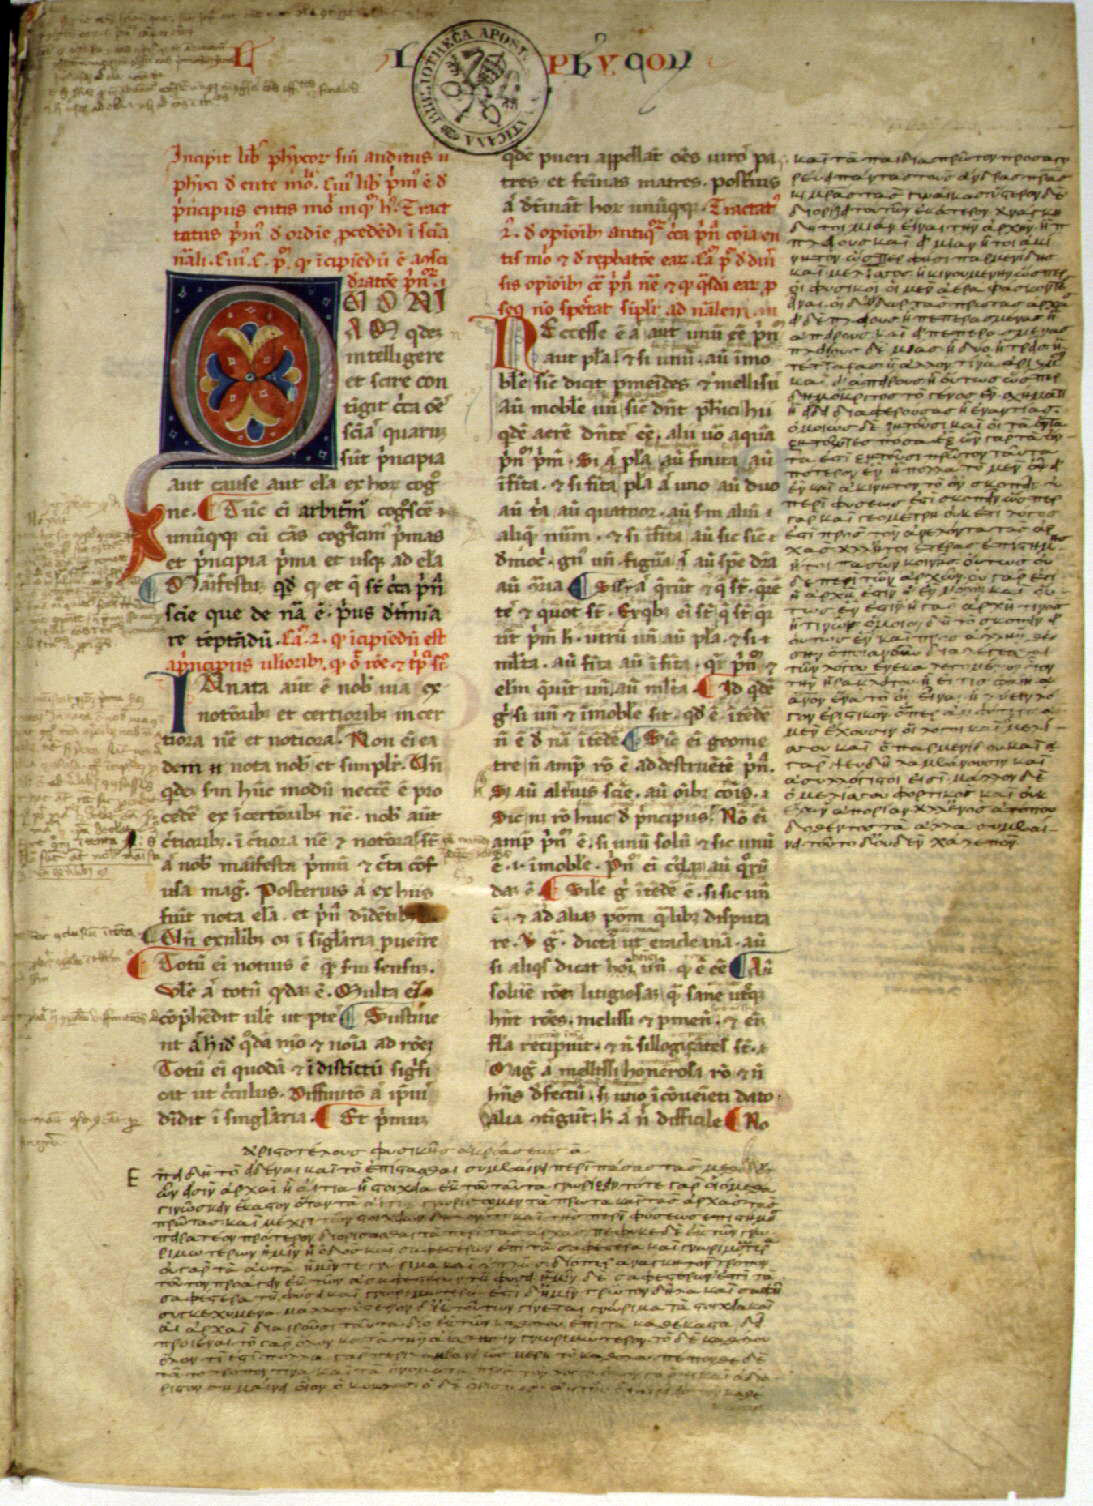 A handwritten copy of The Physics by Aristotle was preserved and probably re-copied in the Middle Ages. The main text is written in a Latin translation, but a second scribe wrote out the original Greek in the margin. (Image via Wikimedia Commons) 